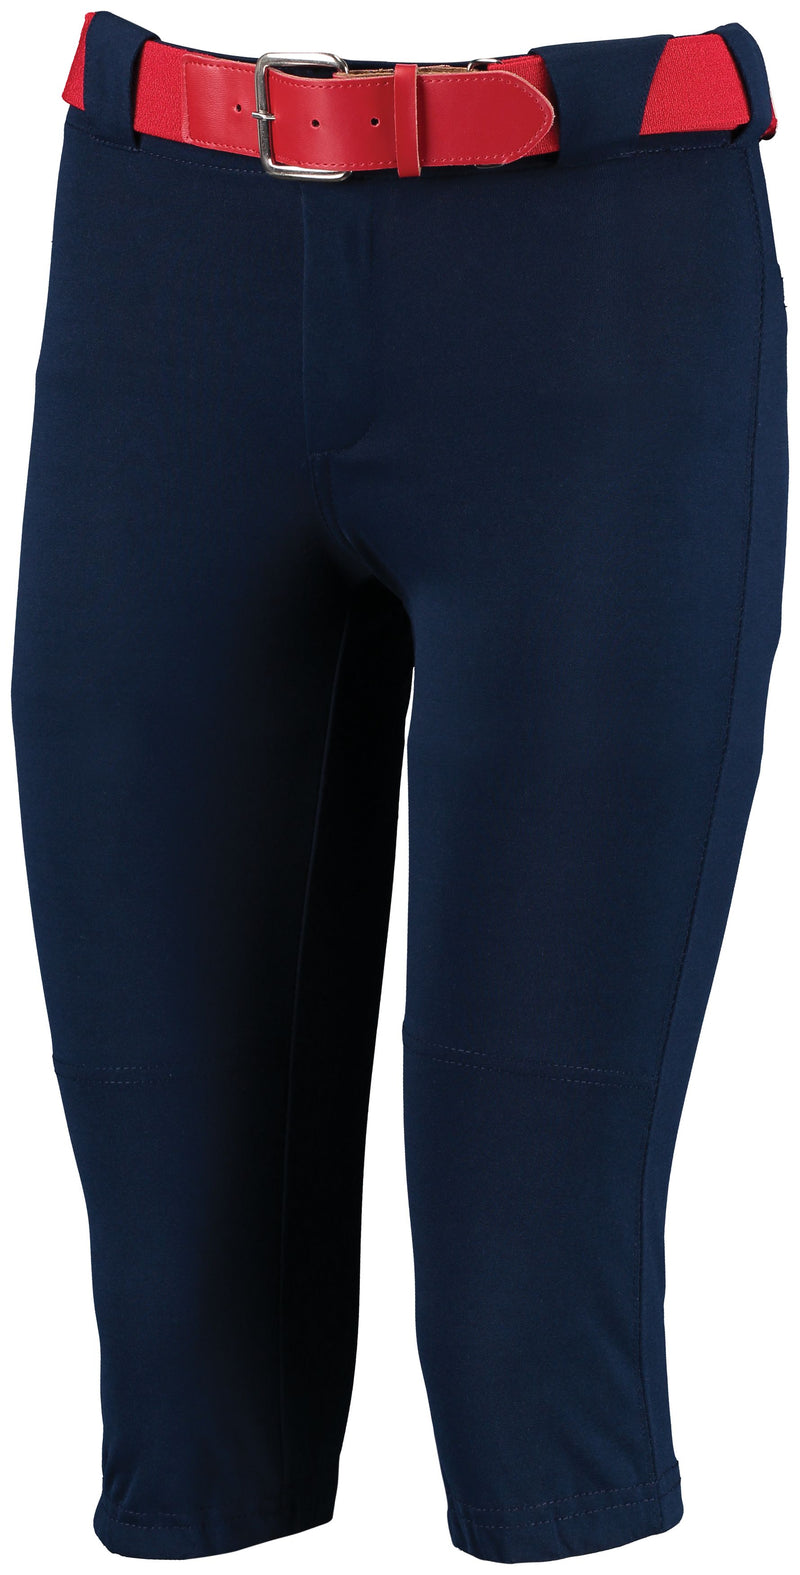 Russell Adult Low Rise Knicker Length Softball Pant